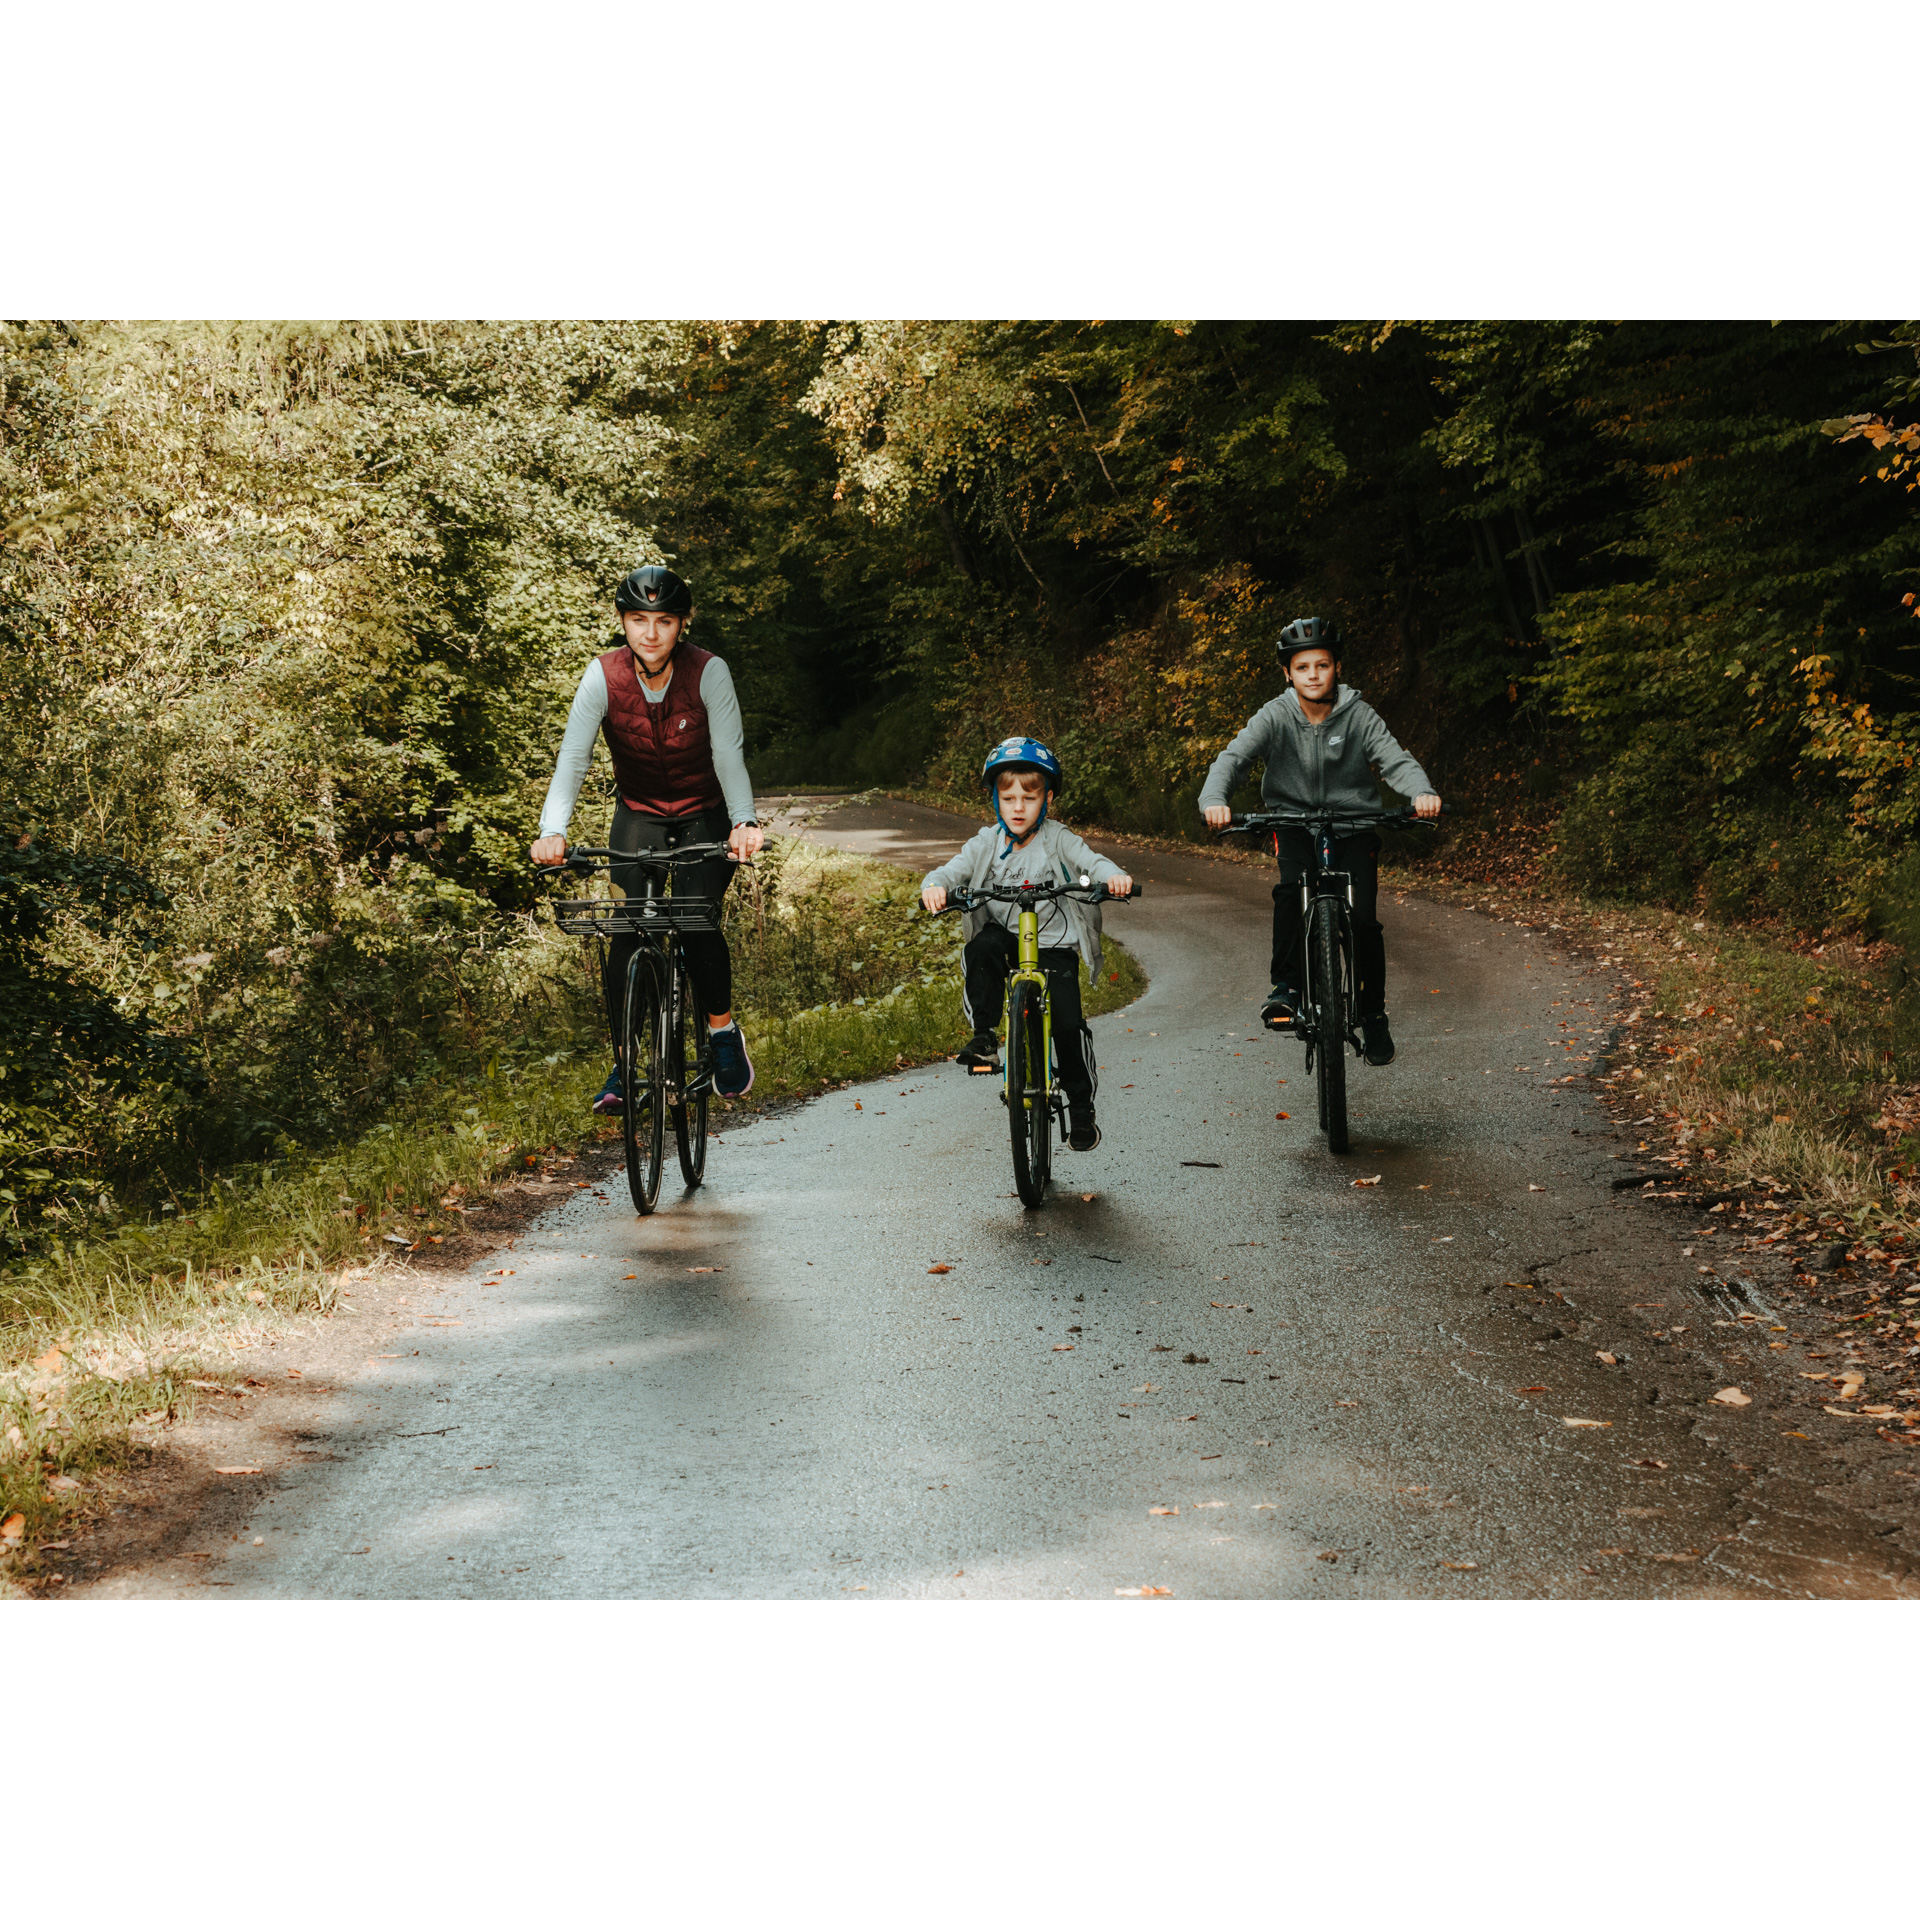 A woman and two boys in helmets cycling along an asphalt, wet road among green trees